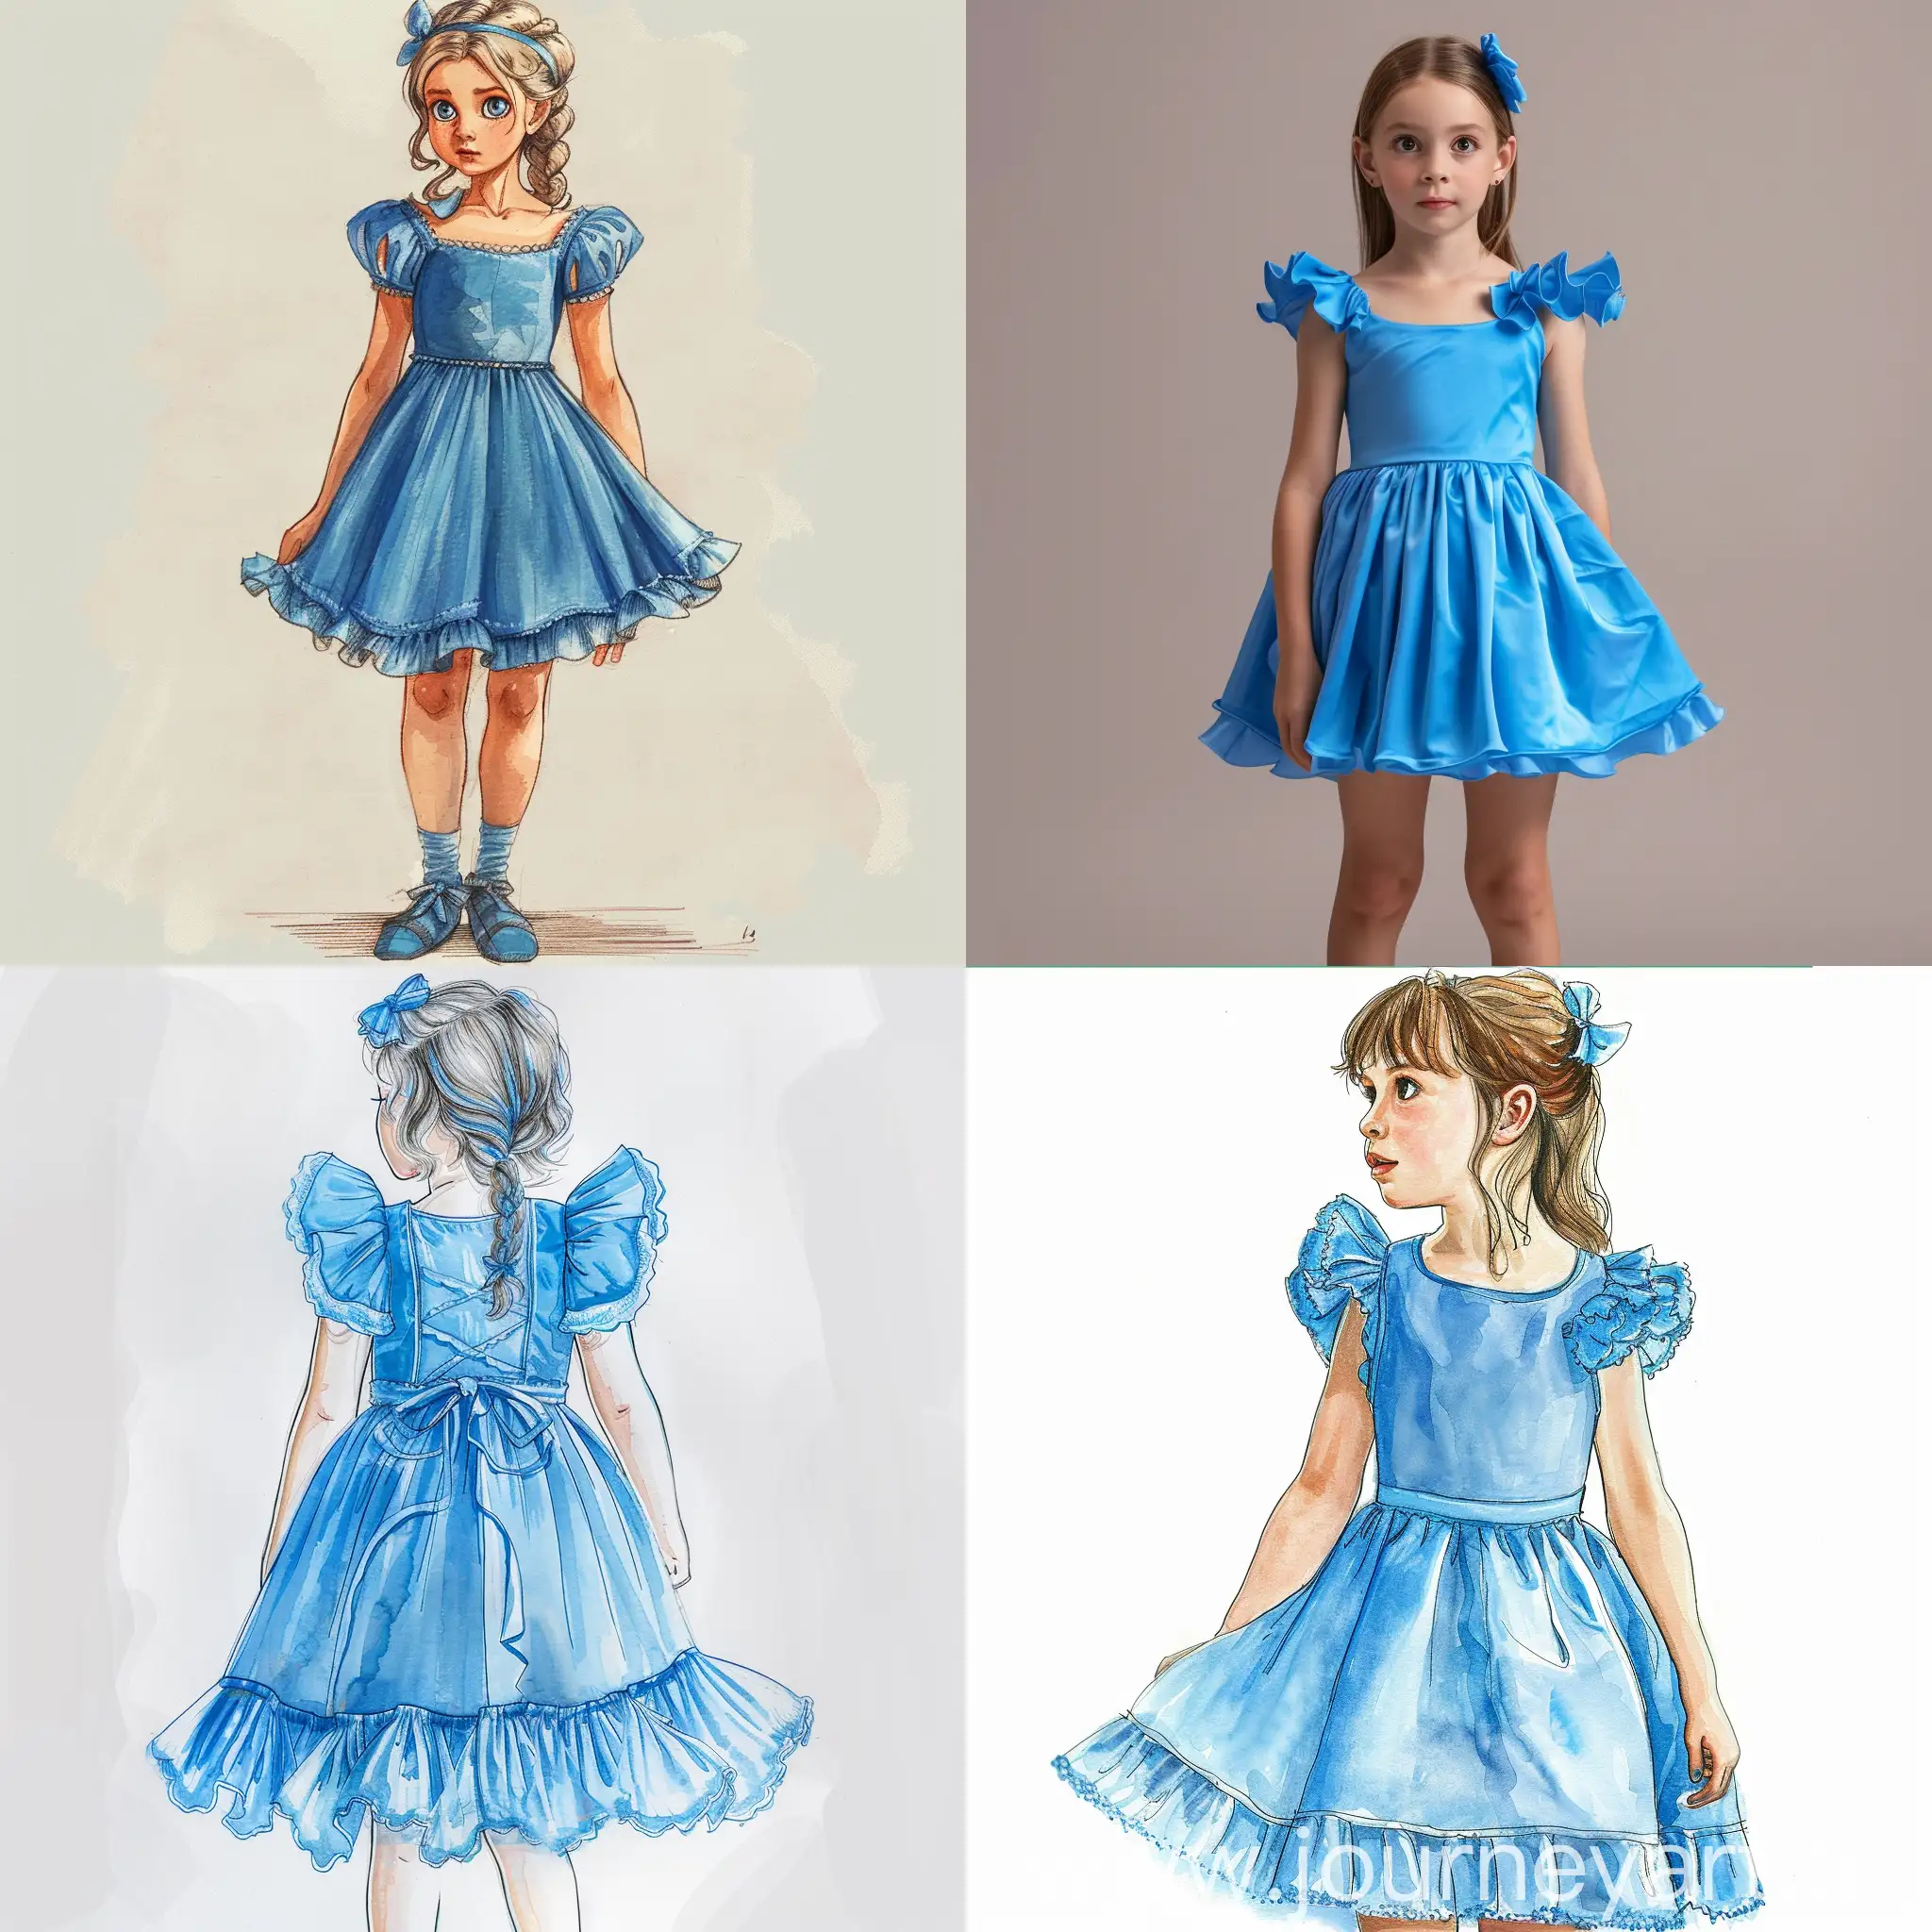 Young-Girl-in-Blue-Princess-Dress-with-Ruffles-and-Sleeveless-Design